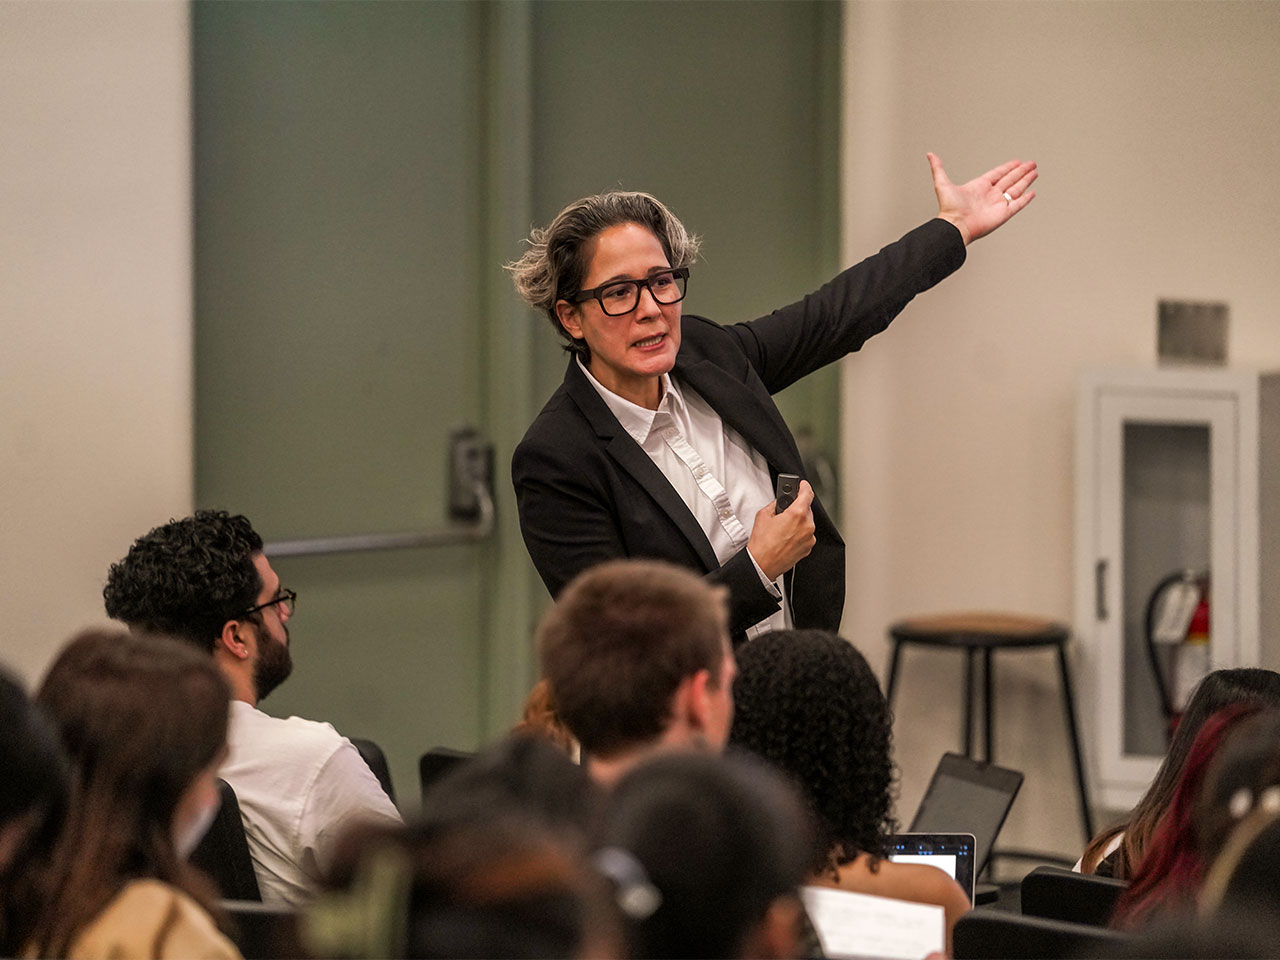 A professor with short gray hair, wearing square-rimmed glasses and a black blazer points to a presentation slide off-camera while teaching an art history class at UC Davis.